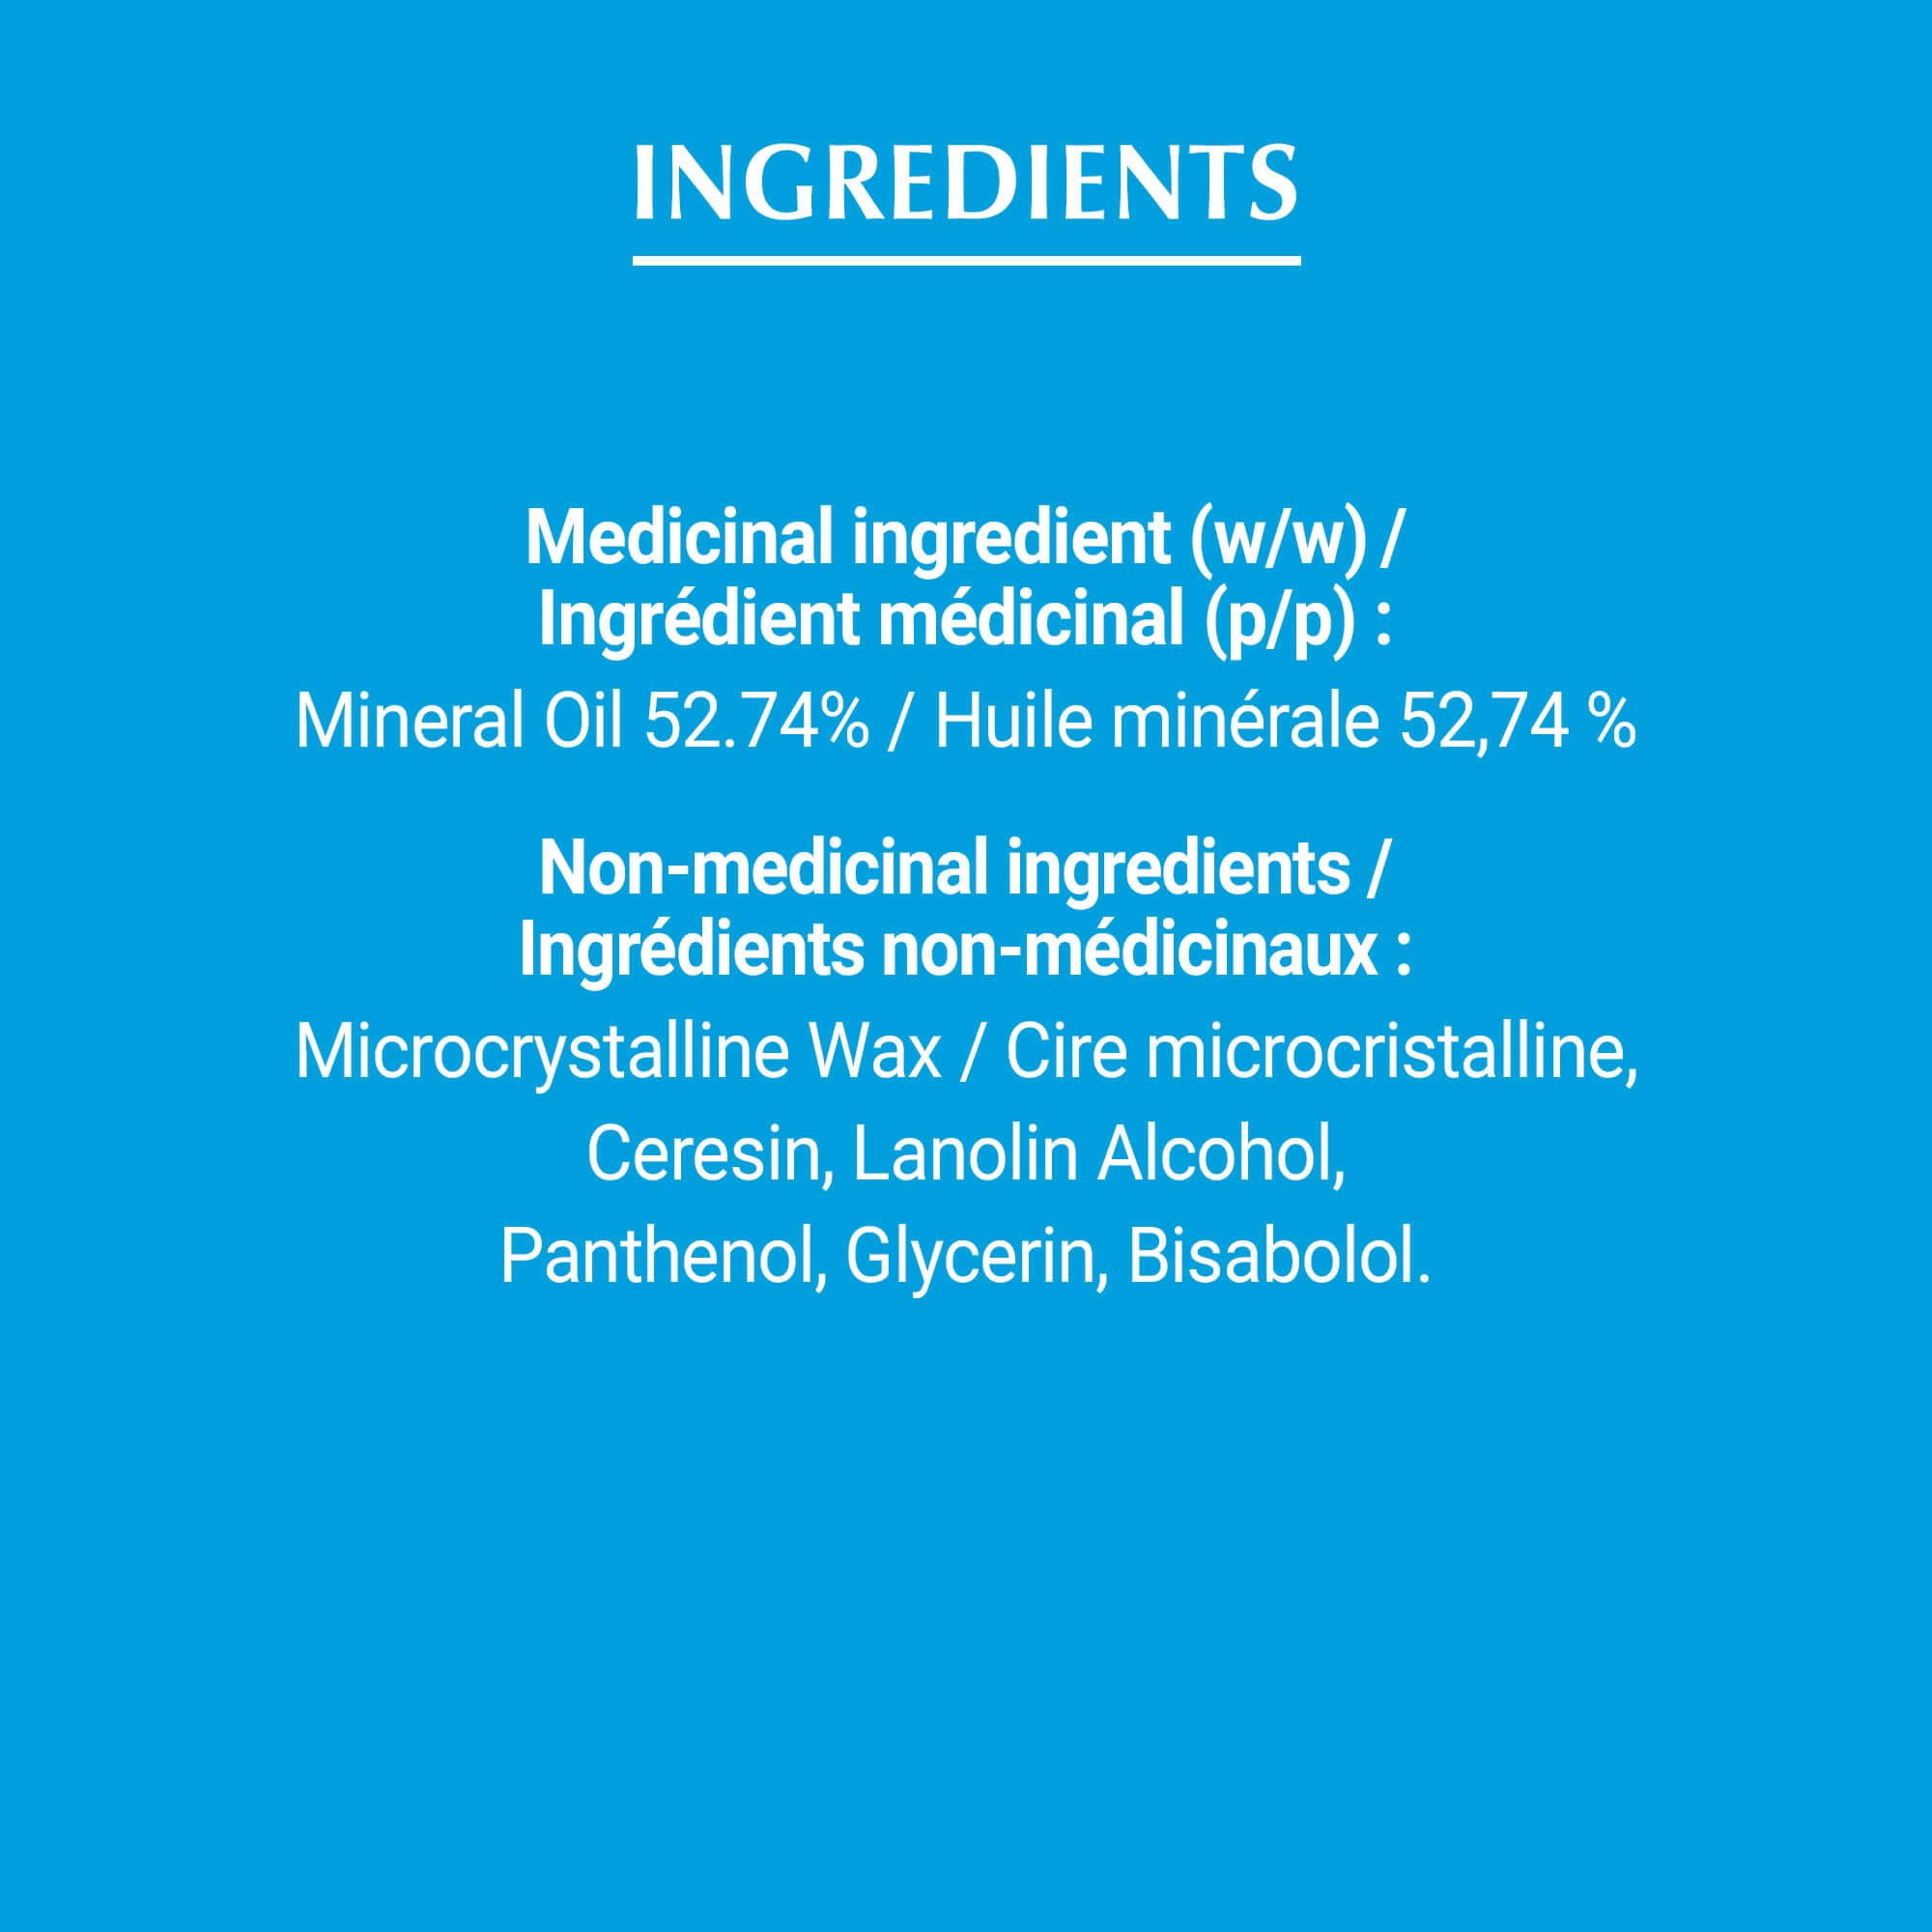 View of Eucerin Aquaphor healing ointment product ingredients text over a blue background.